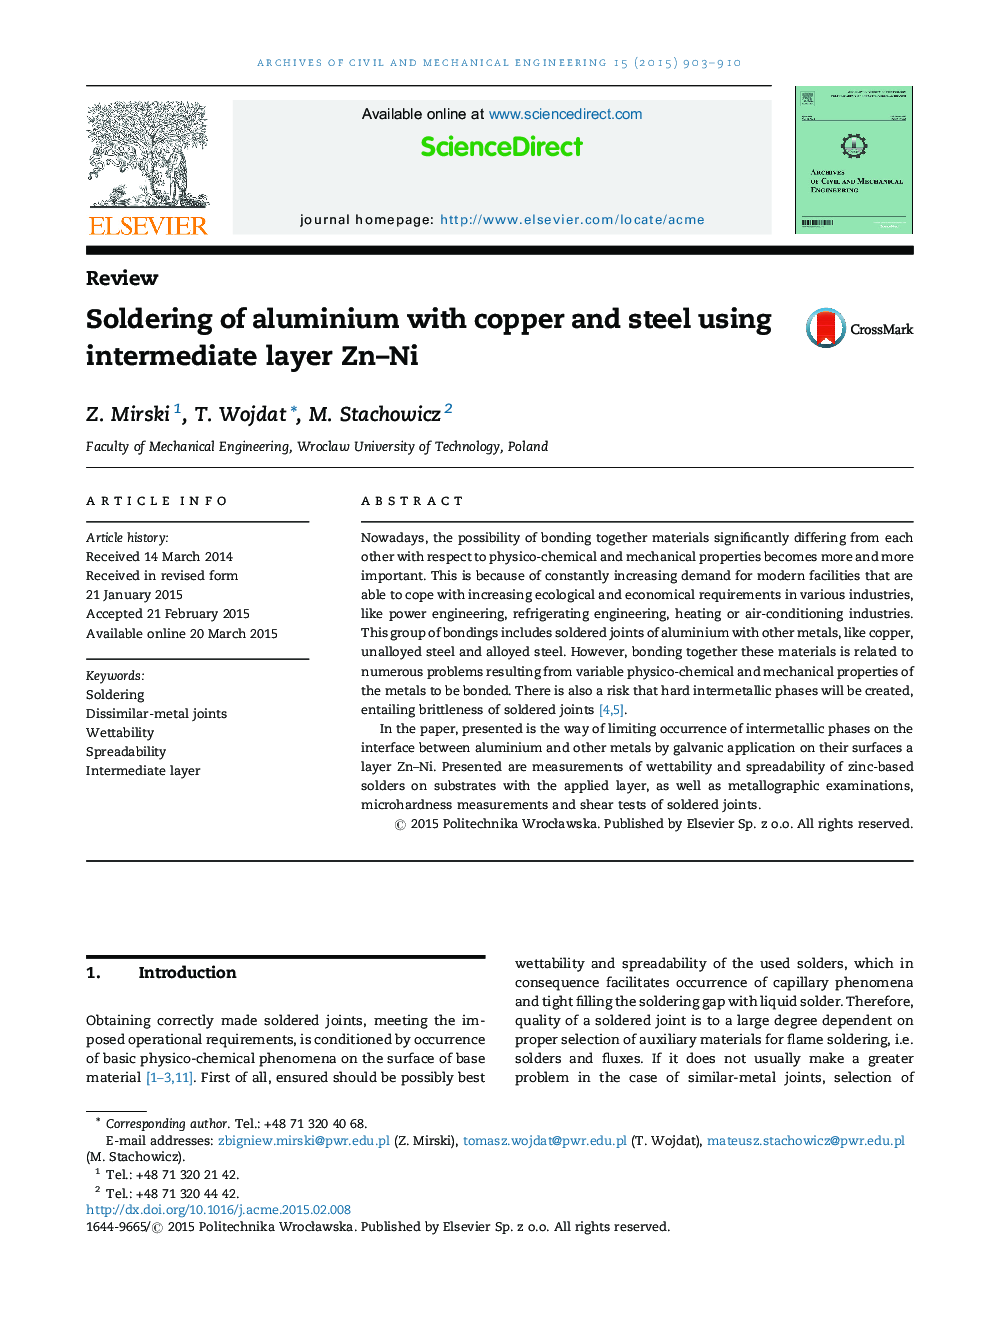 Soldering of aluminium with copper and steel using intermediate layer Zn–Ni